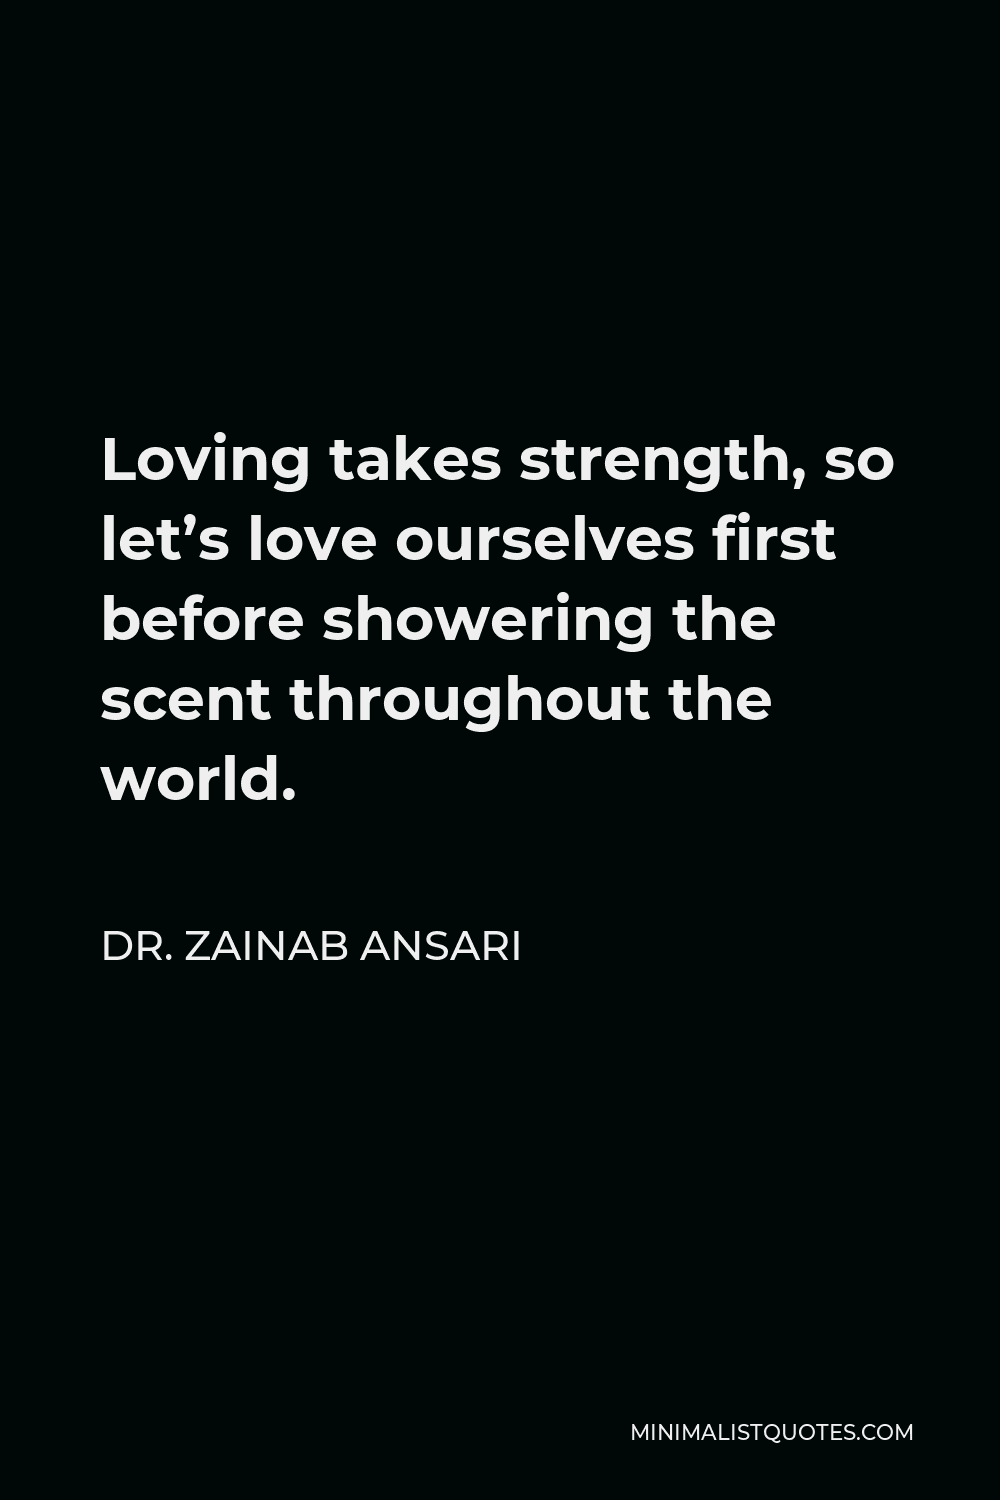 Dr. Zainab Ansari Quote - Loving takes strength, so let’s love ourselves first before showering the scent throughout the world.